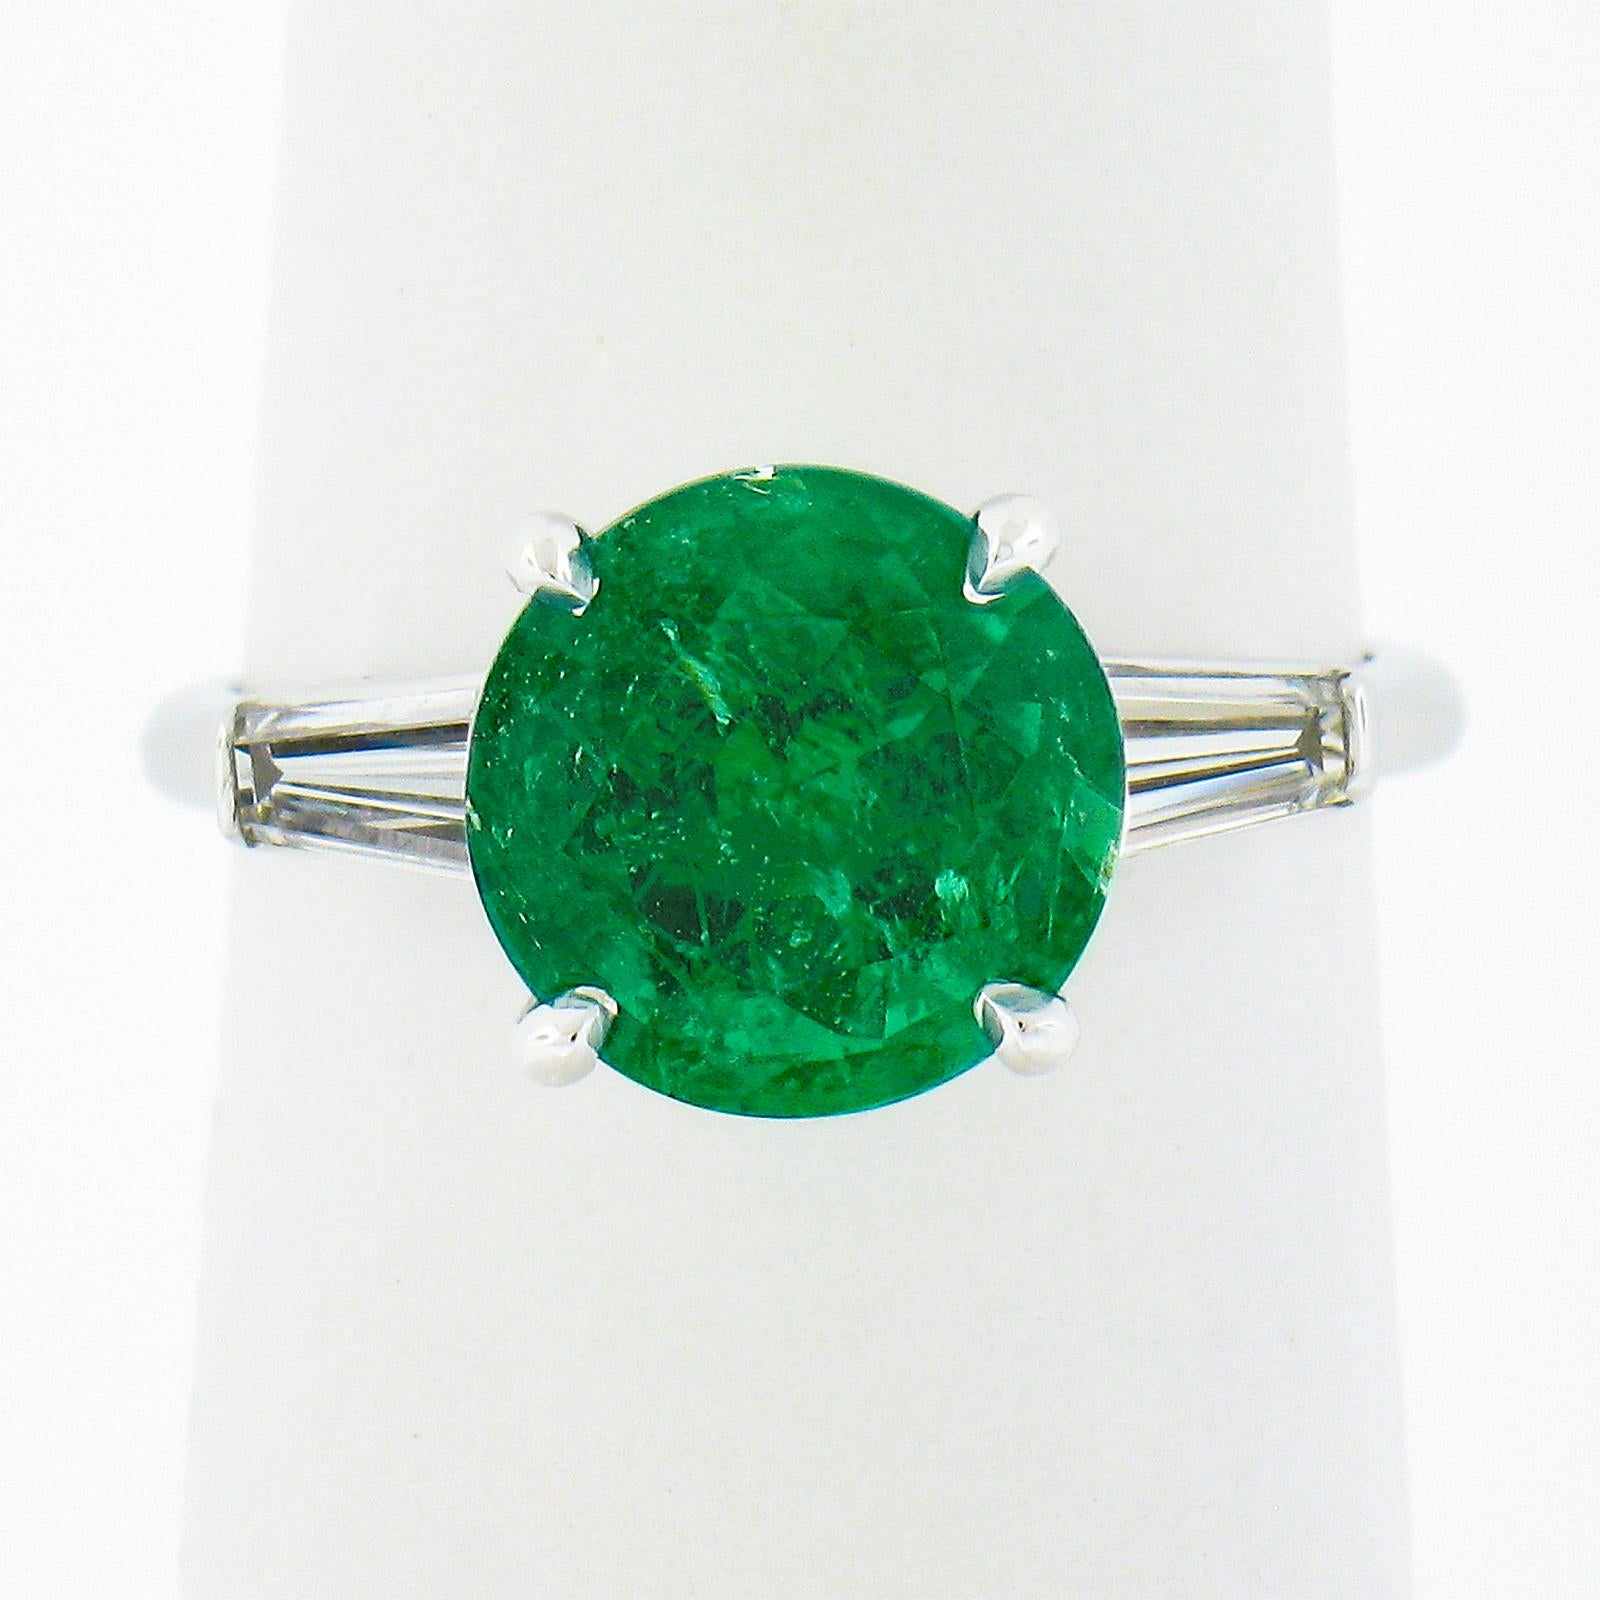 Here we have a magnificent vintage emerald and diamond ring that is crafted in solid platinum. The ring features a gorgeous, GIA certified, natural emerald stone that has a very rare round cut and displays a truly incredible brilliant and vivid